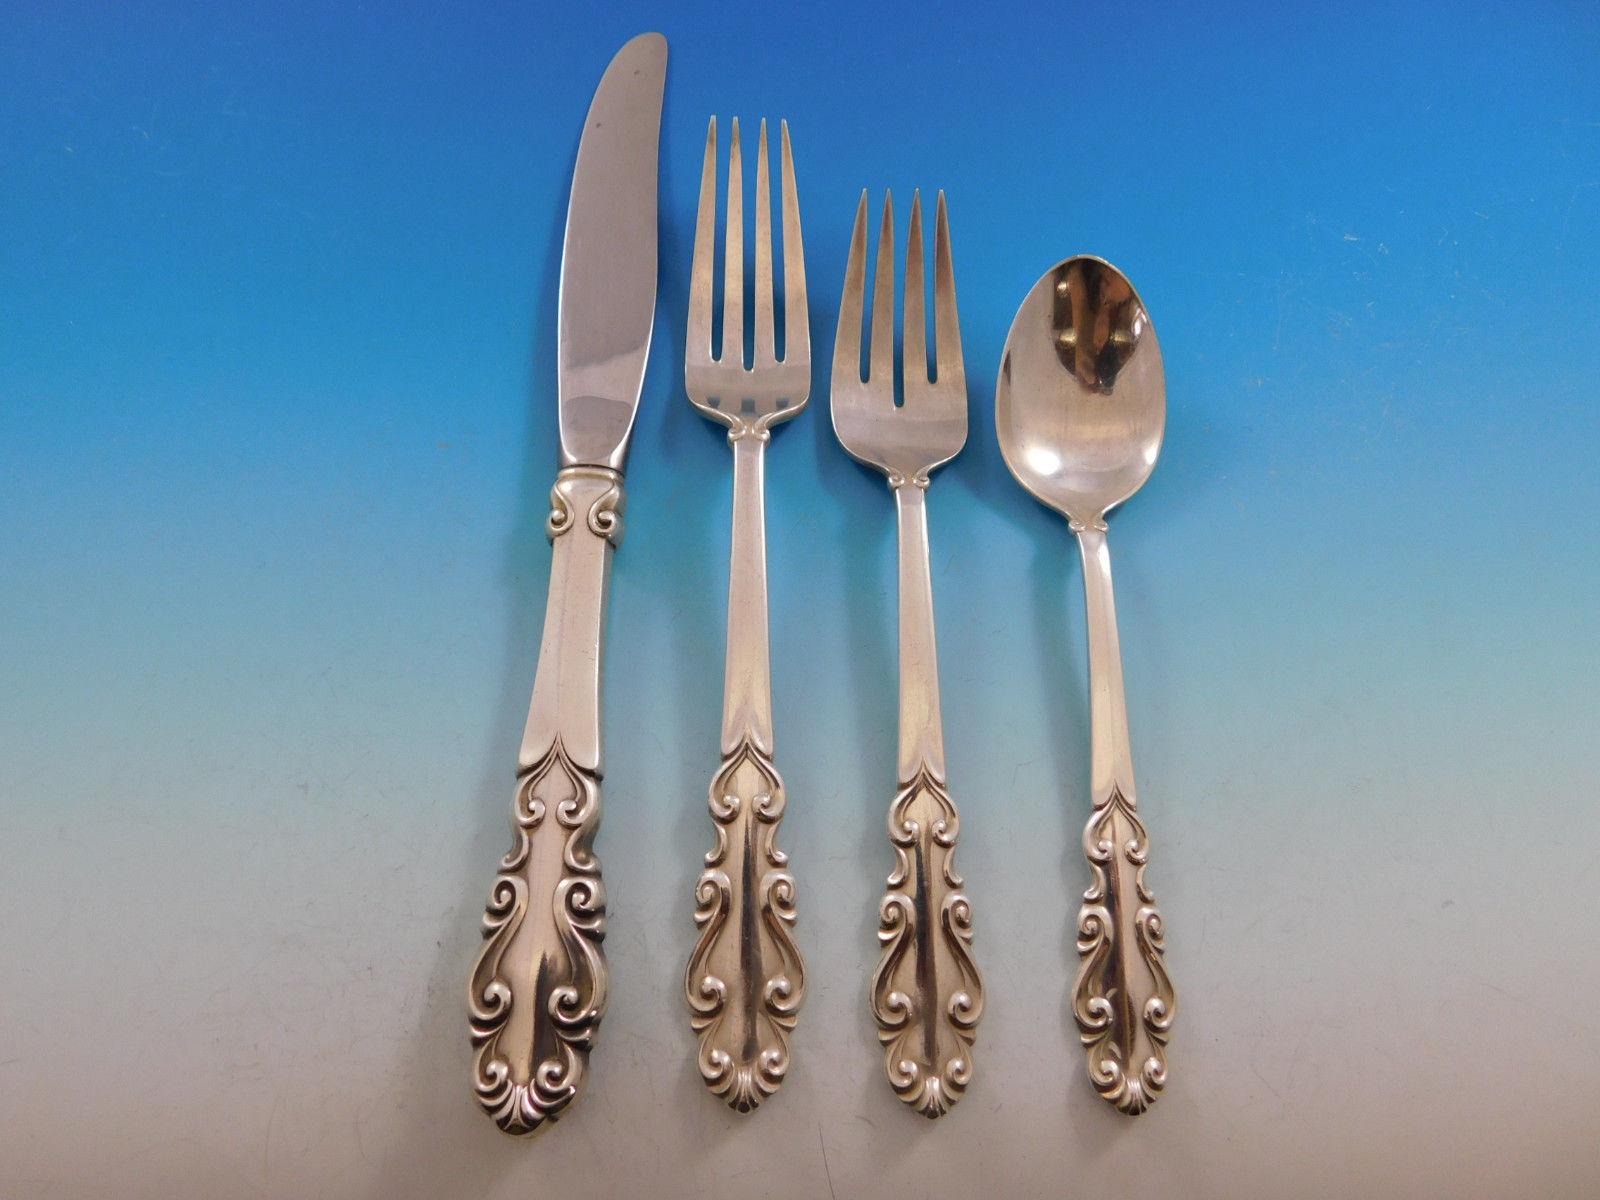 Esplanade by Towle sterling silver flatware set of 92 pieces. This set includes:

12 knives, 8 7/8